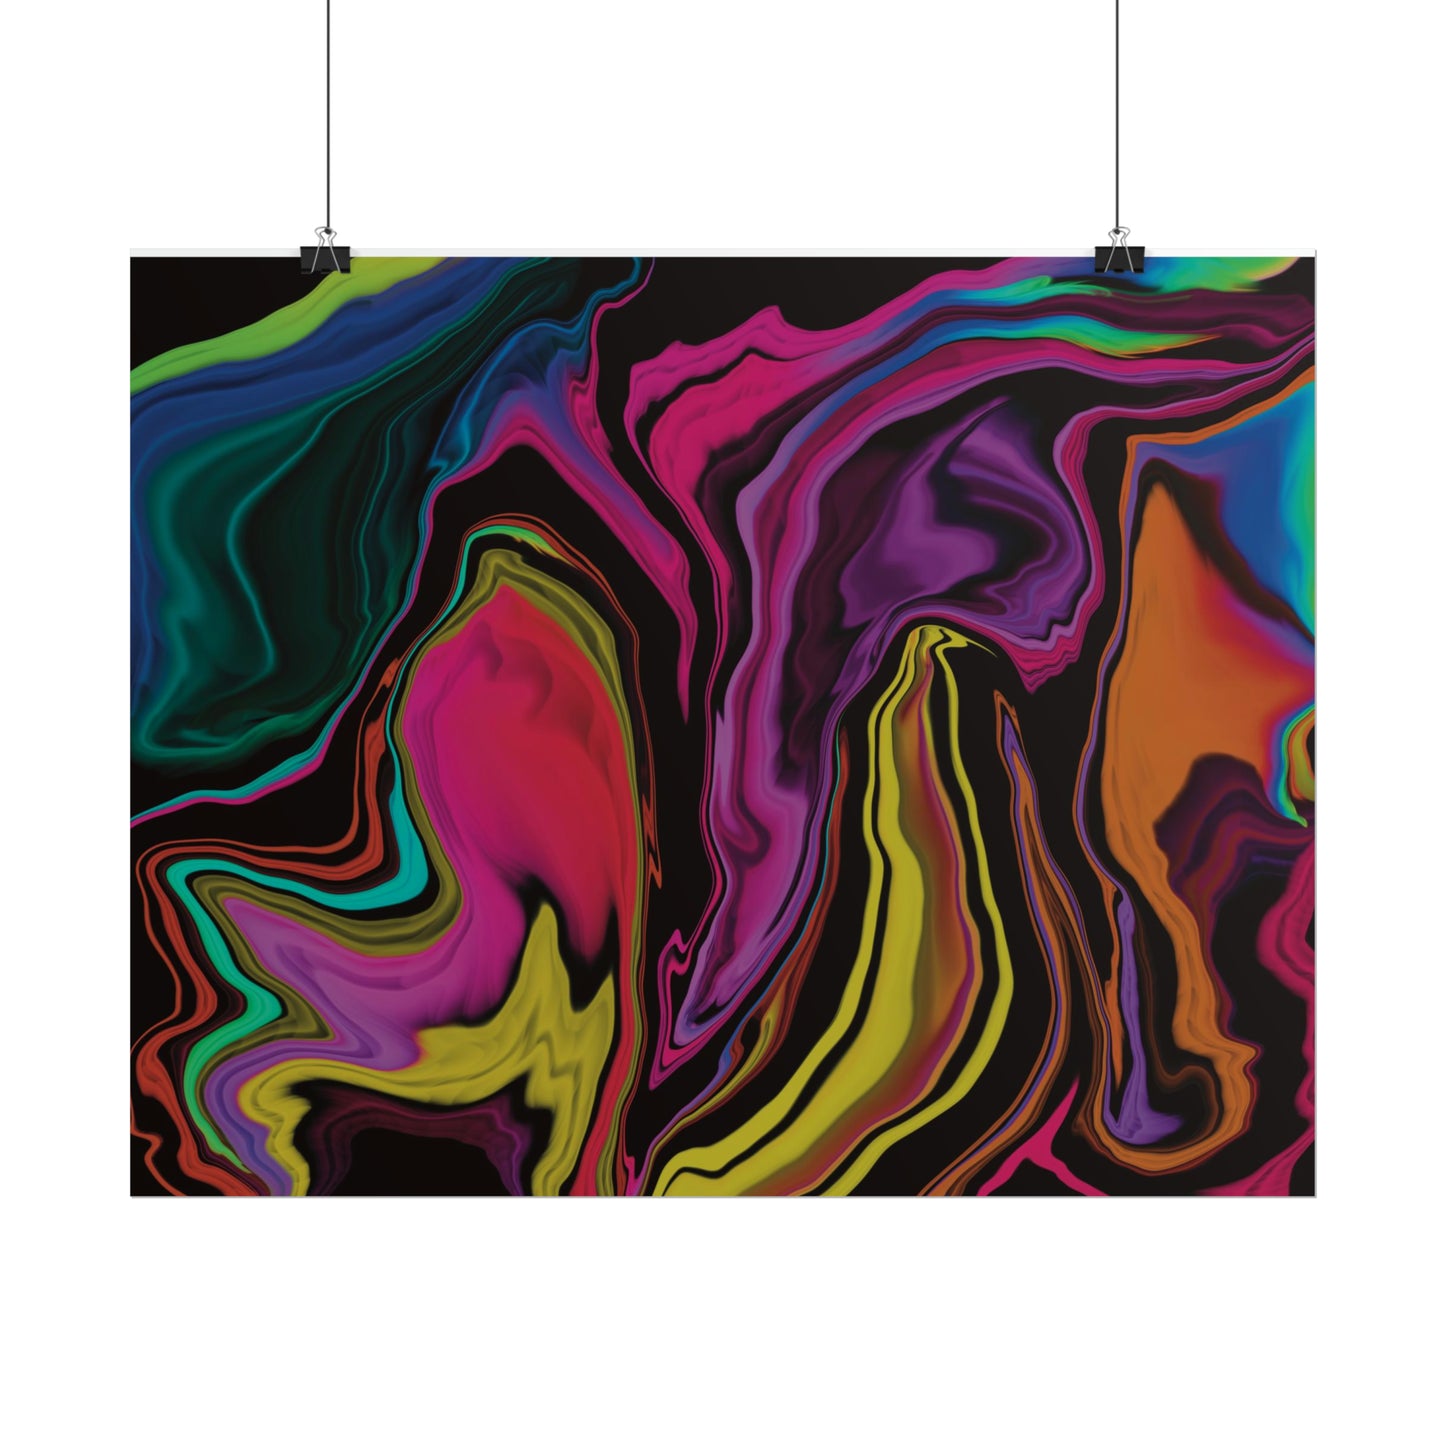 Unleash Your Power Fluid Painting Poster - Energetic Art for Self-Empowerment